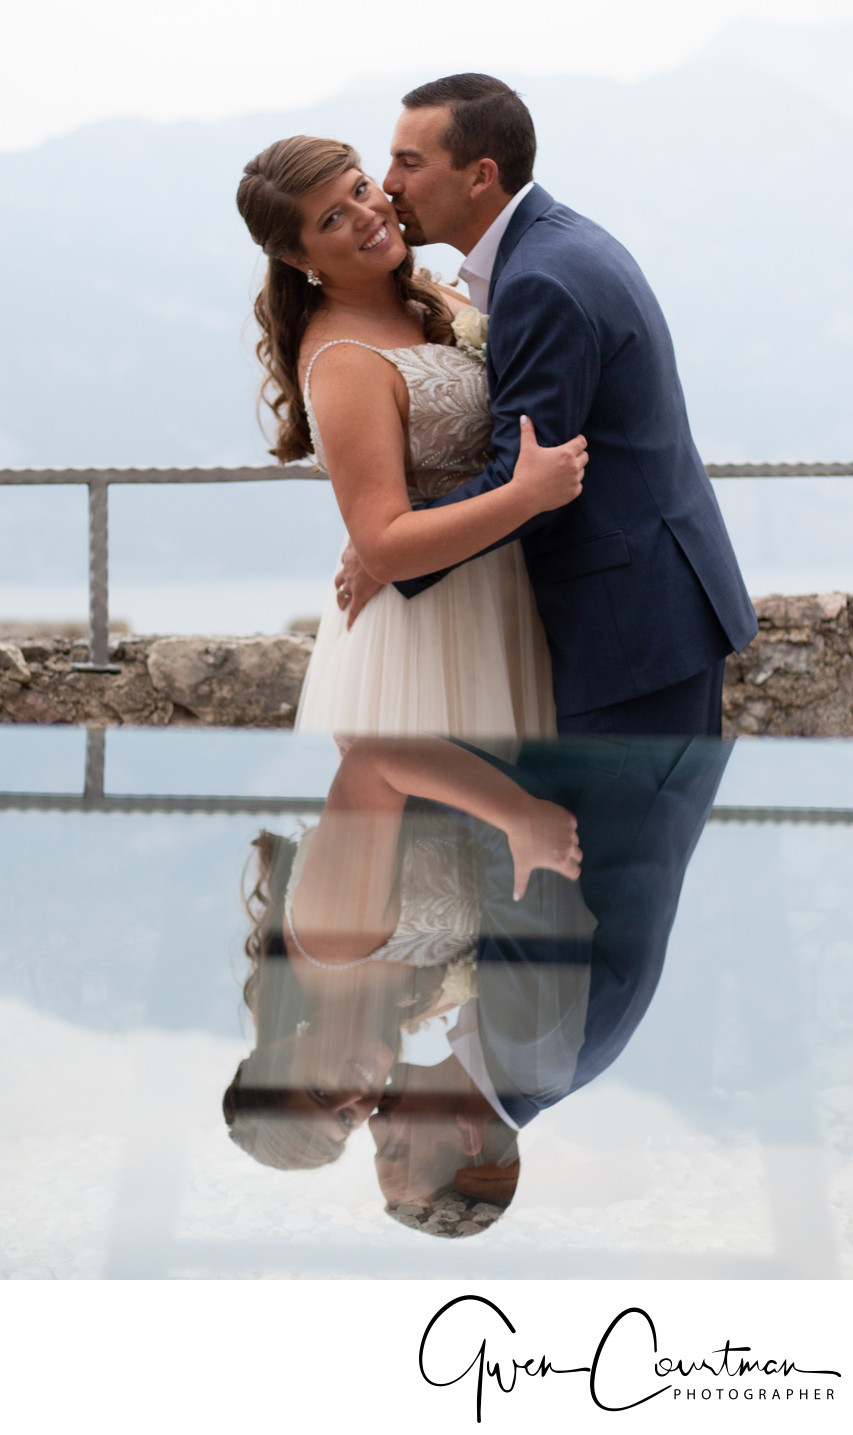 Justin and Kirsten, Malcesine Castle, Terrace, Italy